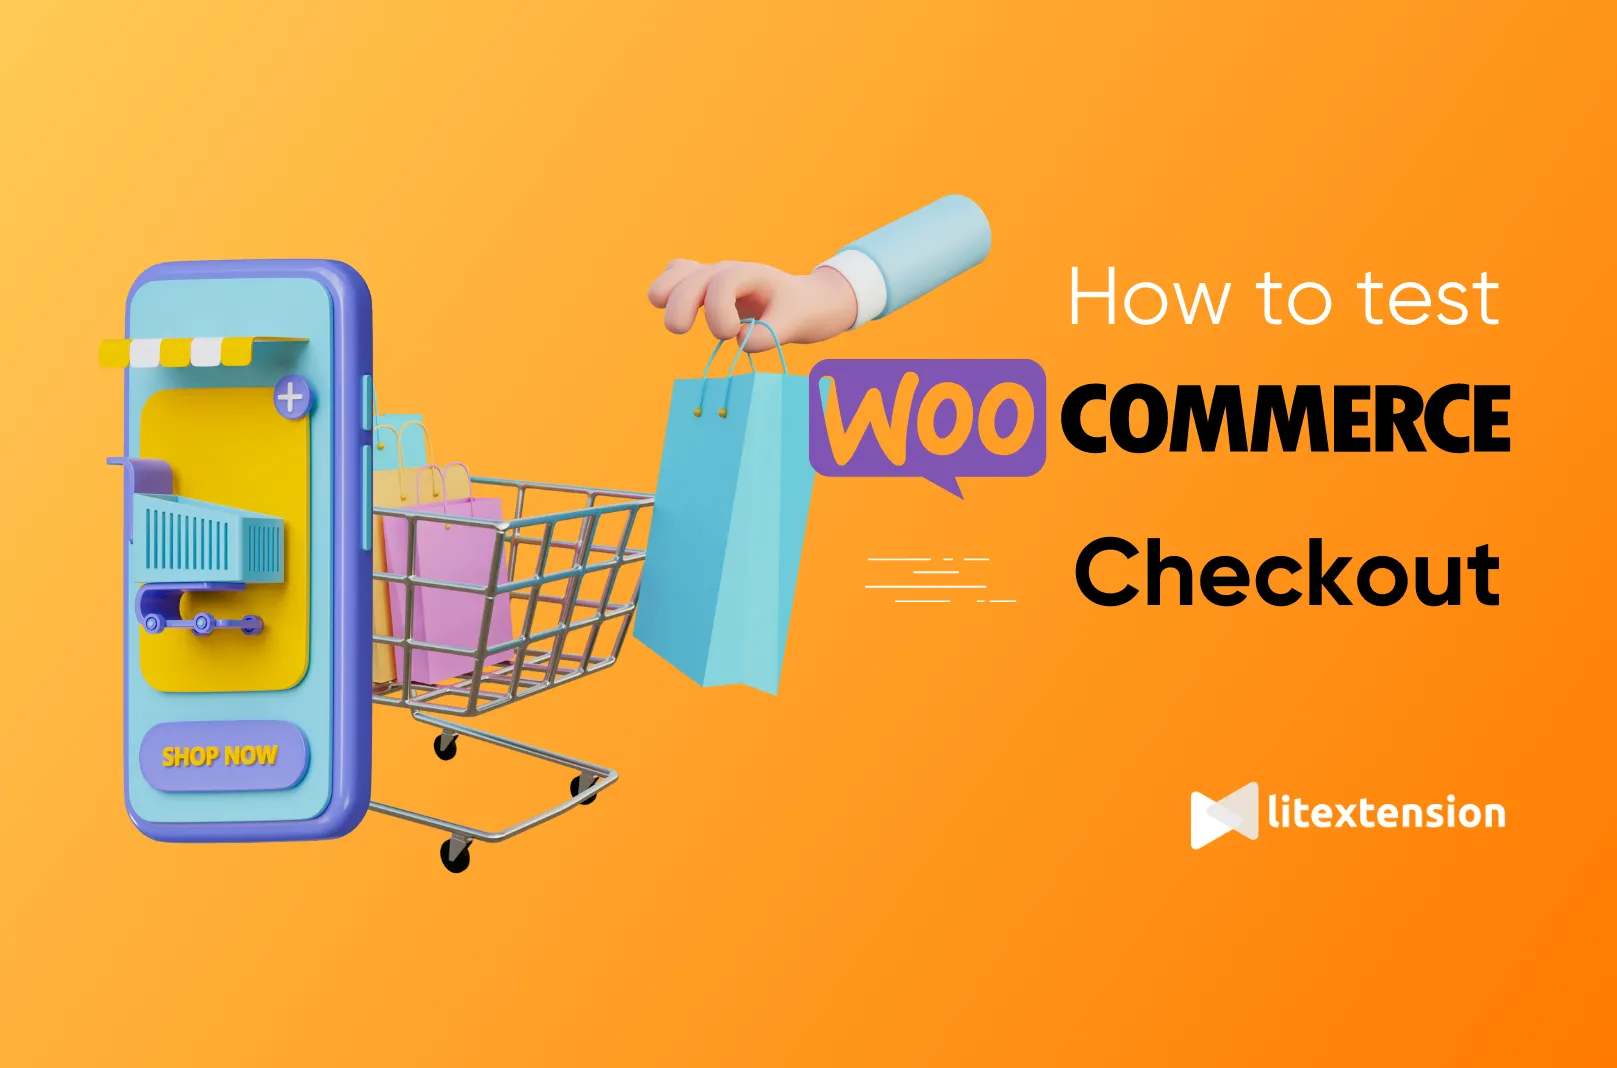 Why Do You Need a Seamless eCommerce Checkout Flow?